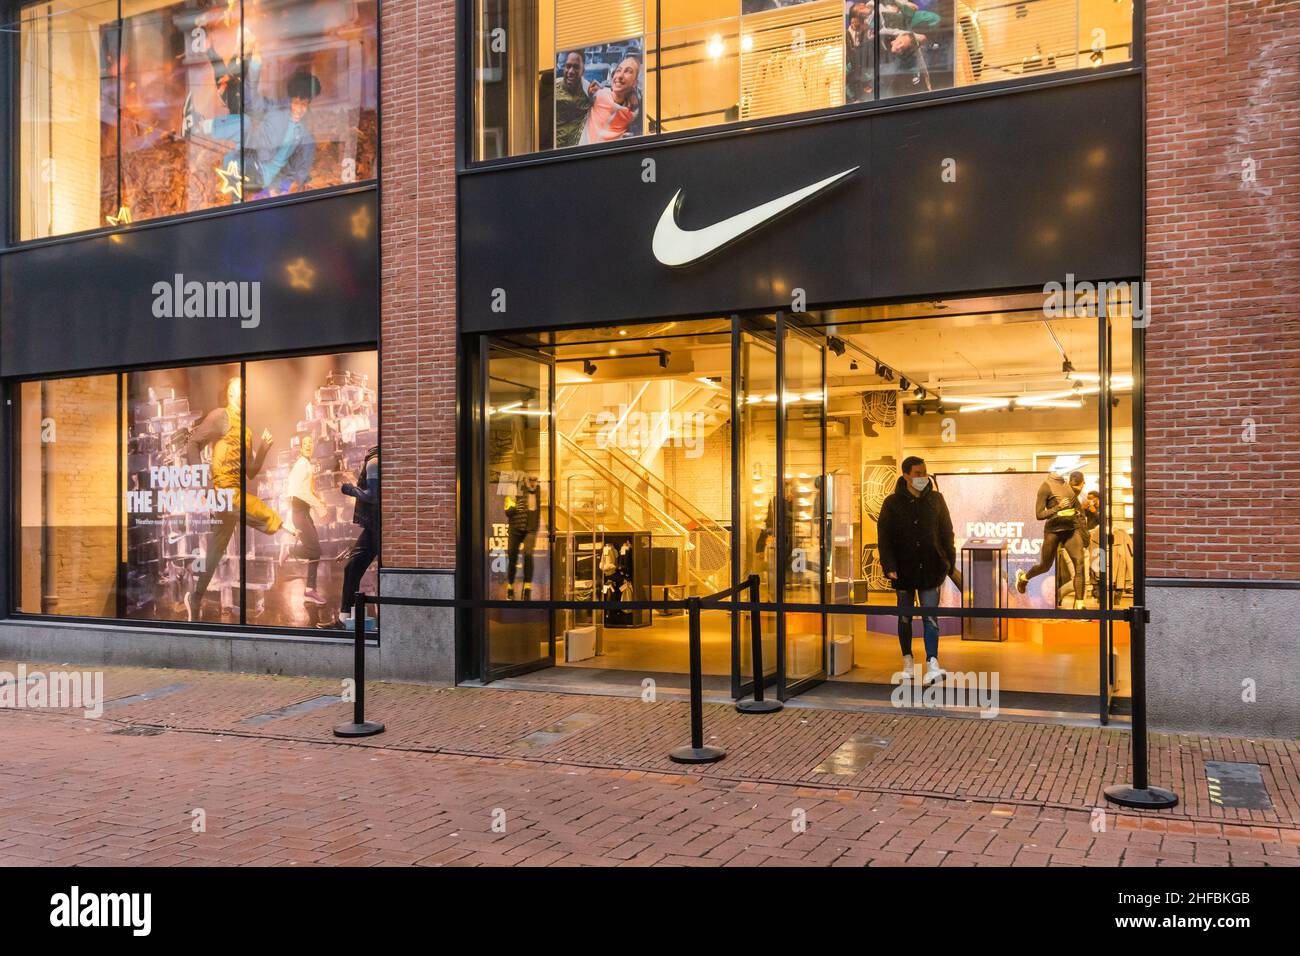 Demonstreer genezen Kilometers Amsterdam, Netherlands. 15 jan 2022. Doors are open and barrier tape stands  are placed at the Nike sportswear store in the Kalverstraat, where an early  customer walks out. Credit: Steppeland/Alamy Live News